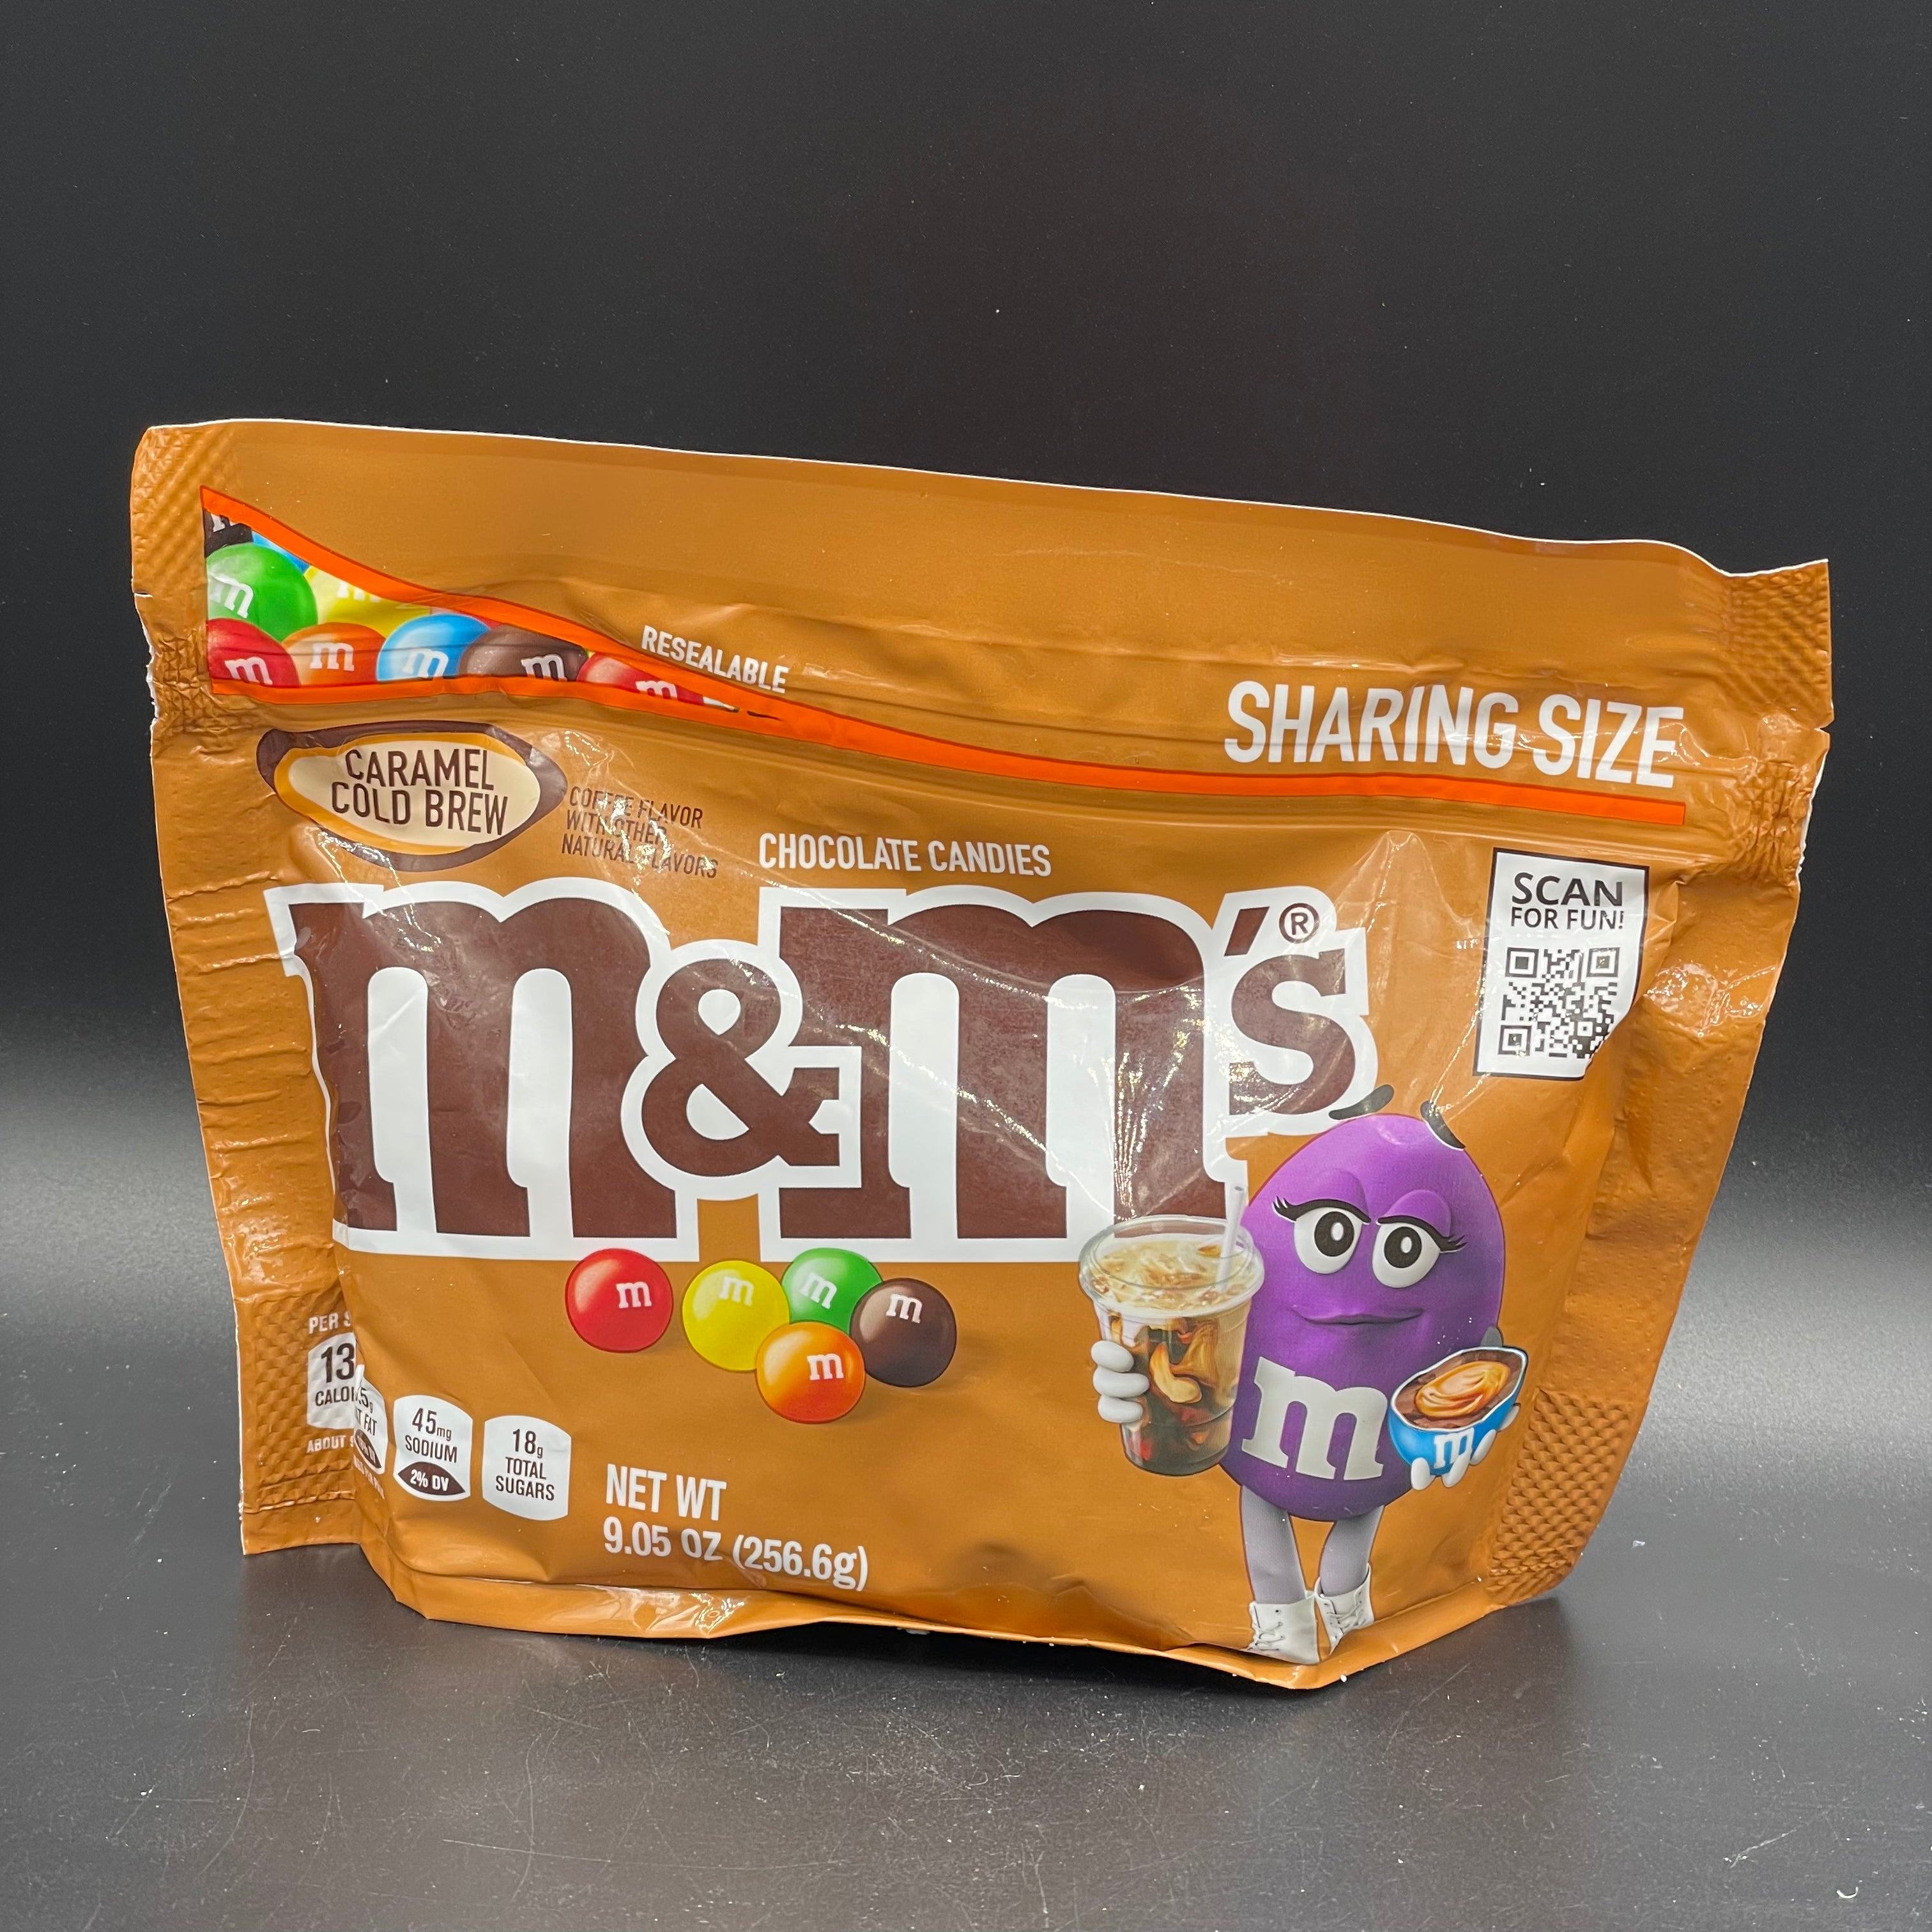 SPECIAL M&M's Chocolate Caramel Cold Brew Flavour, Big Sharing Size 25